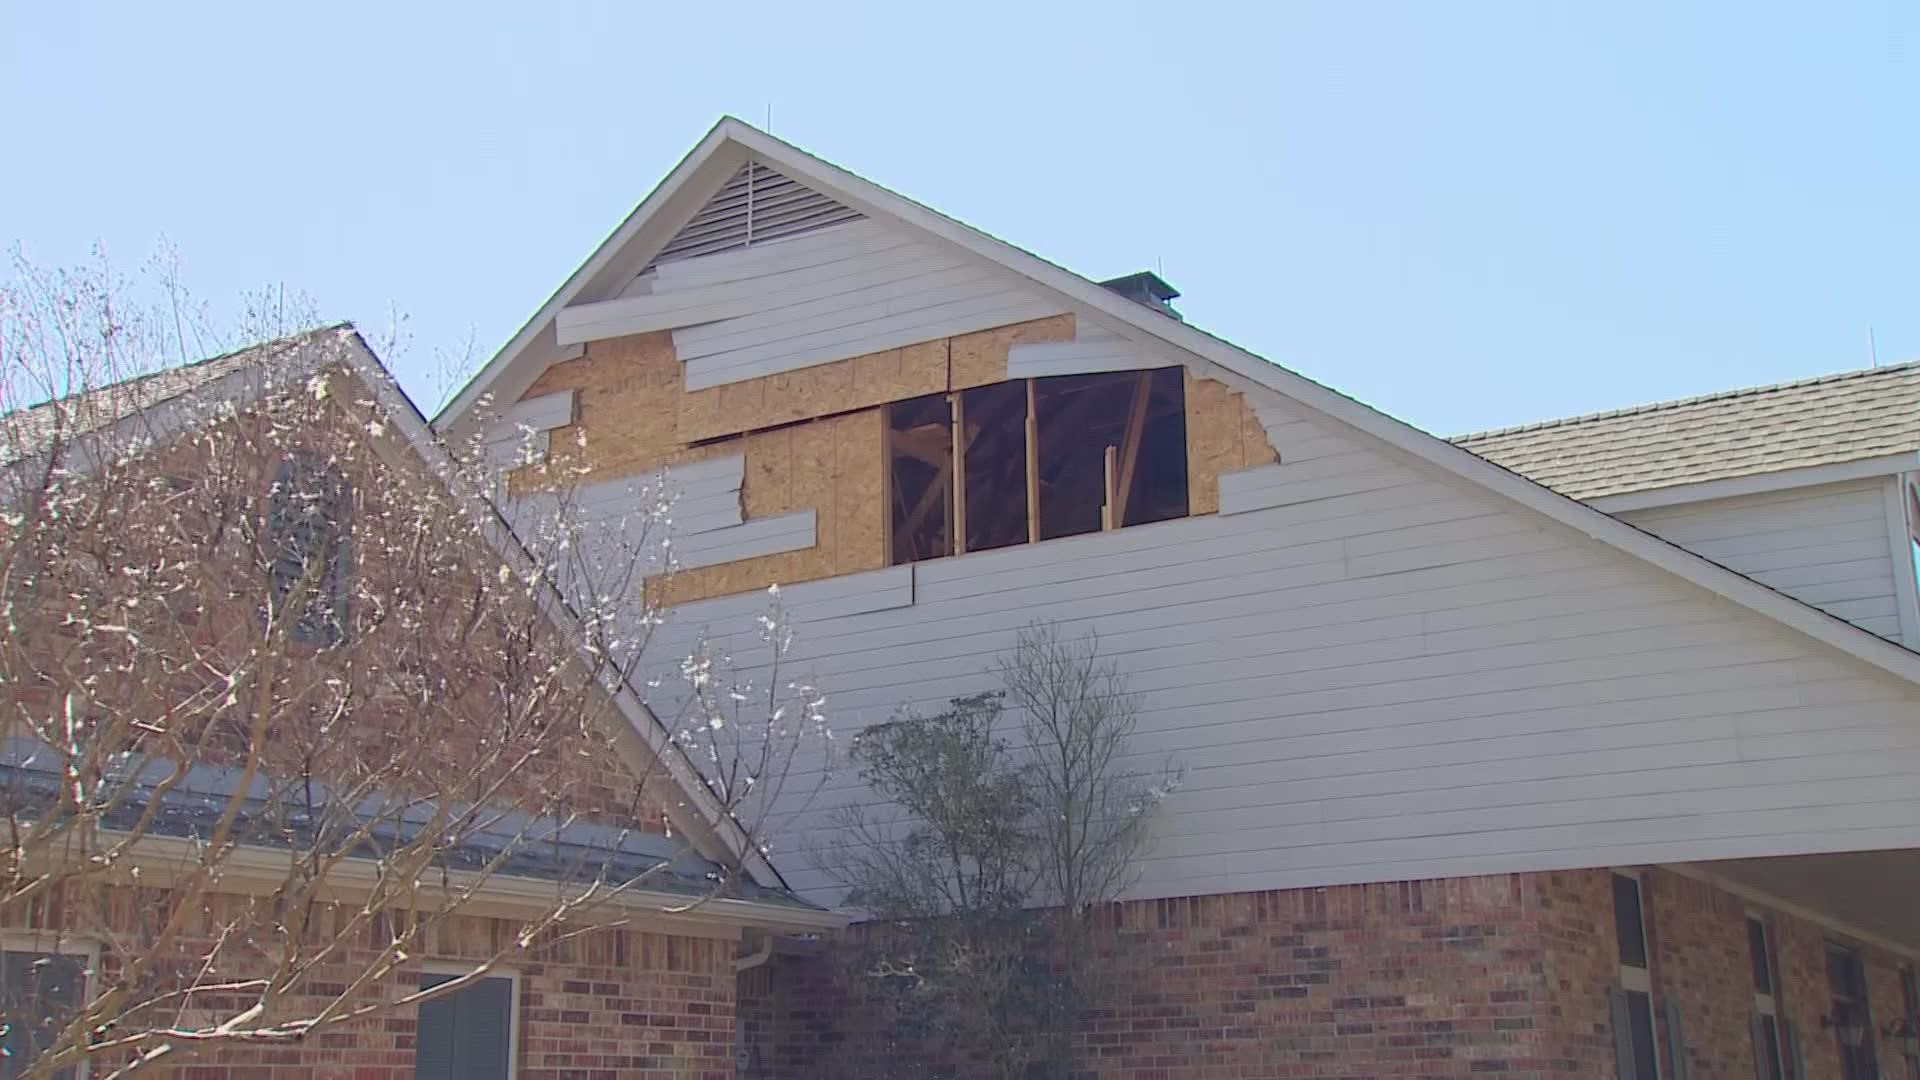 The National Weather Service was responding to the area to assess the damage.